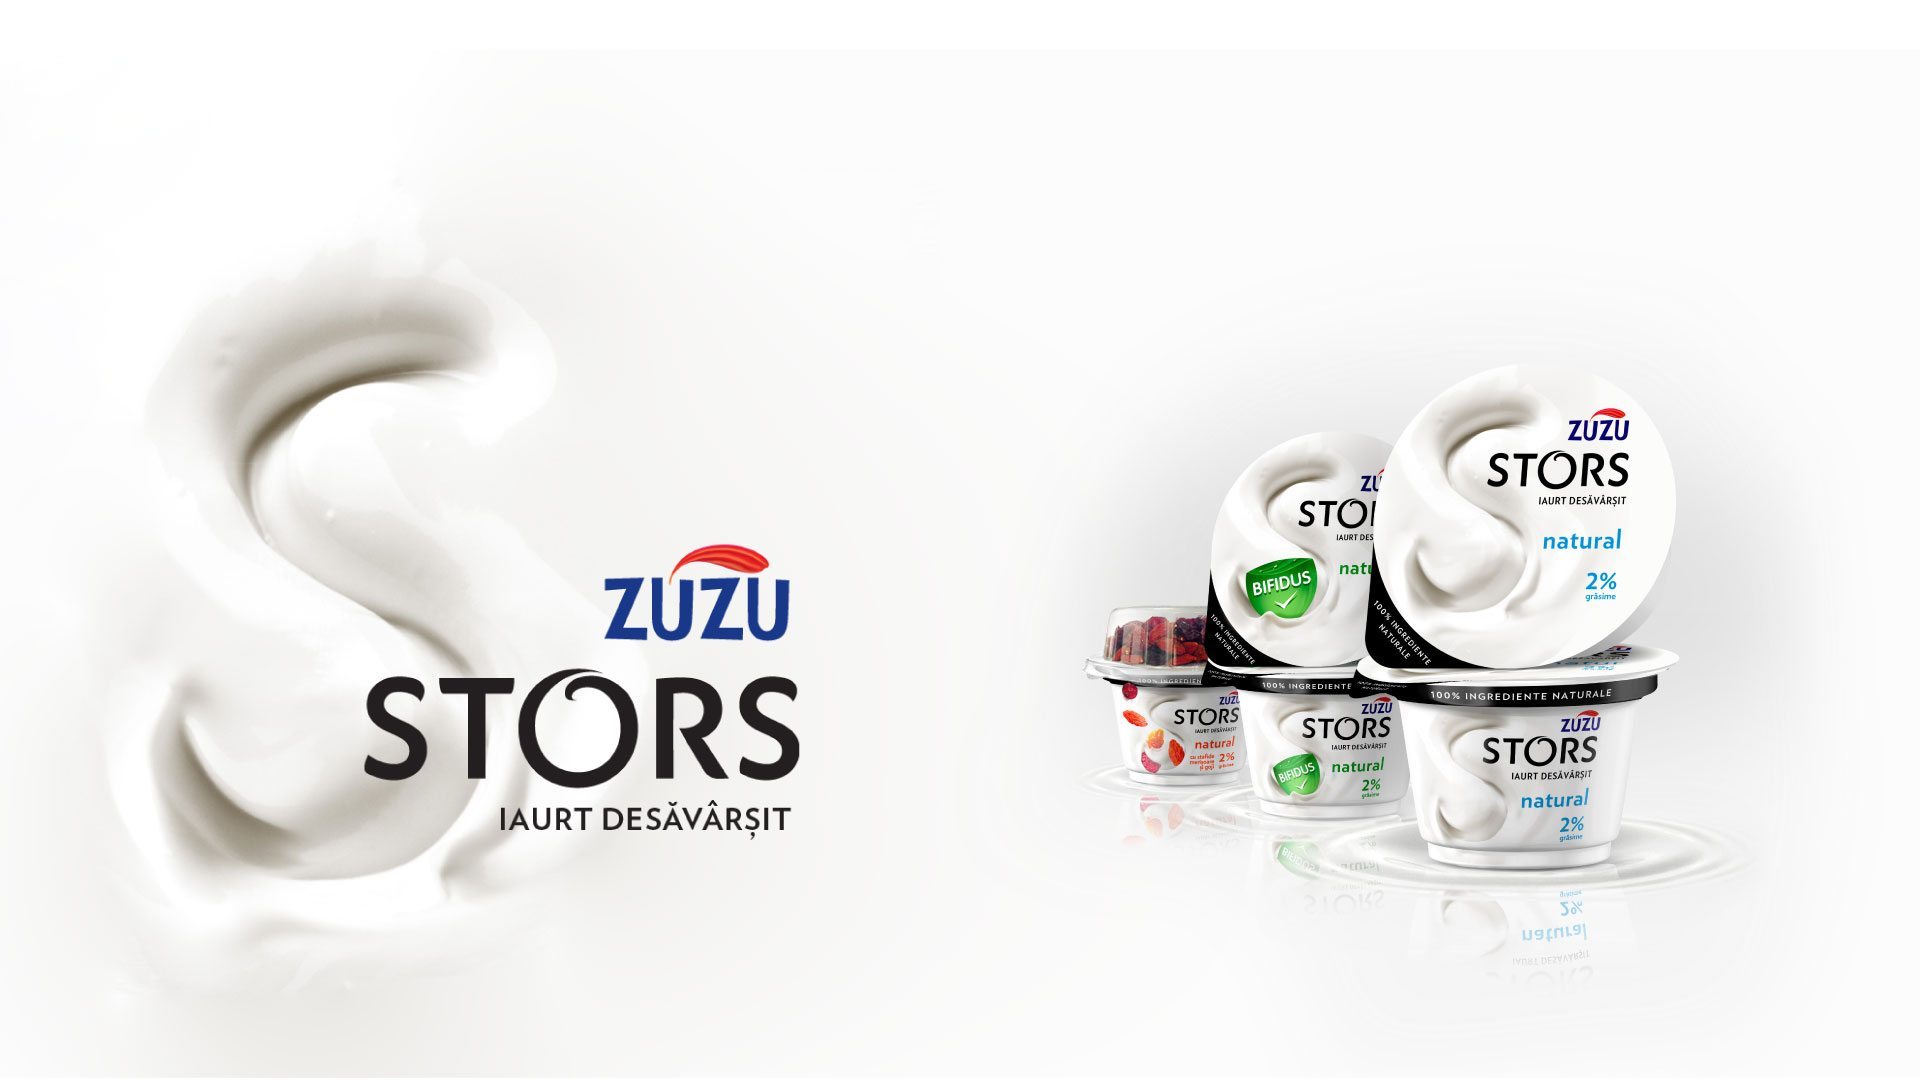 ZUZU launches STORS yoghurt and creates a new category in the market